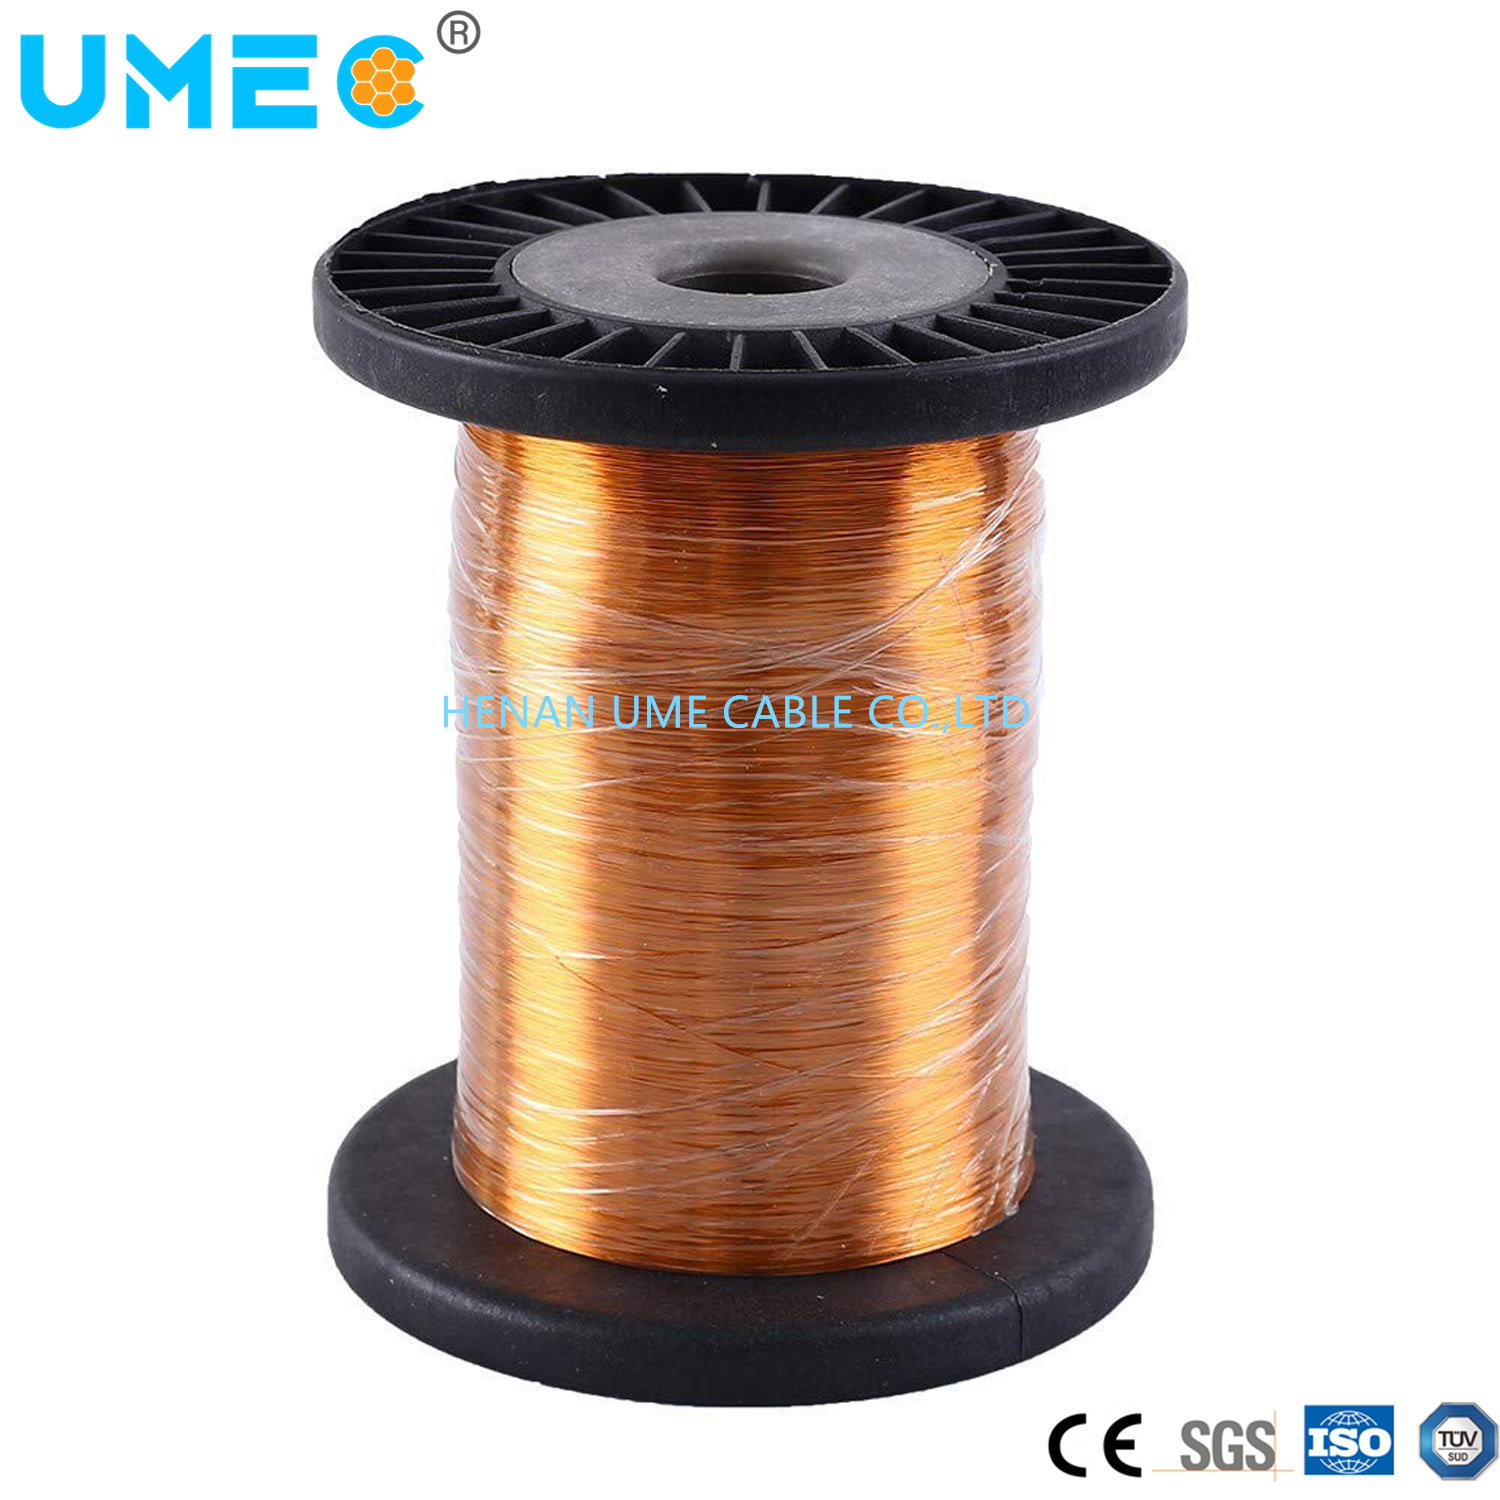 Bare Copper Wire Is Coated with an Insulating Enamel Enameled 19AWG/21AWG/22AWG Class200